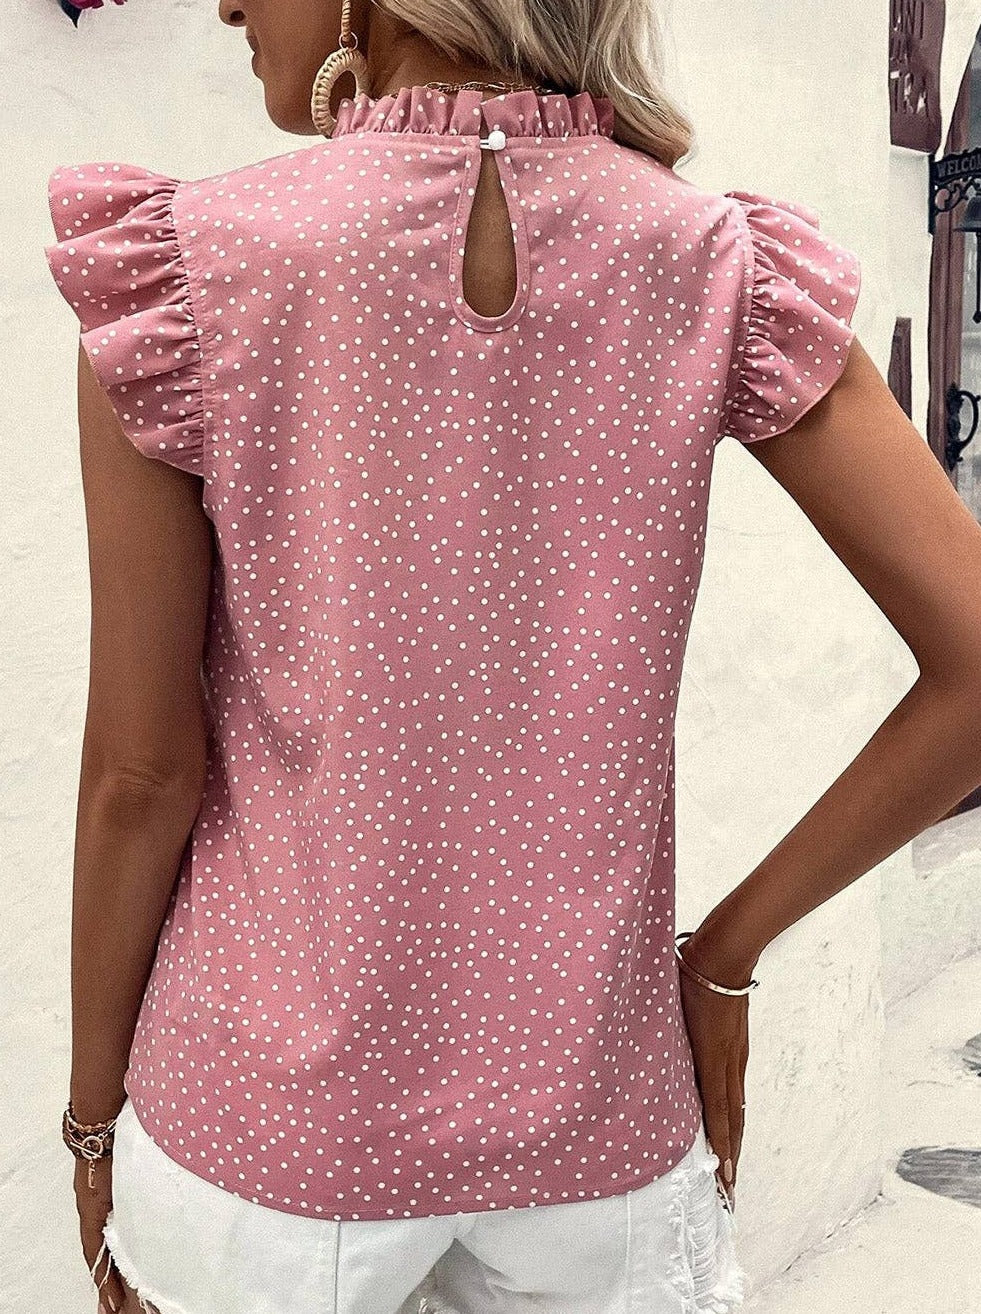 Paige Dotted Blouse